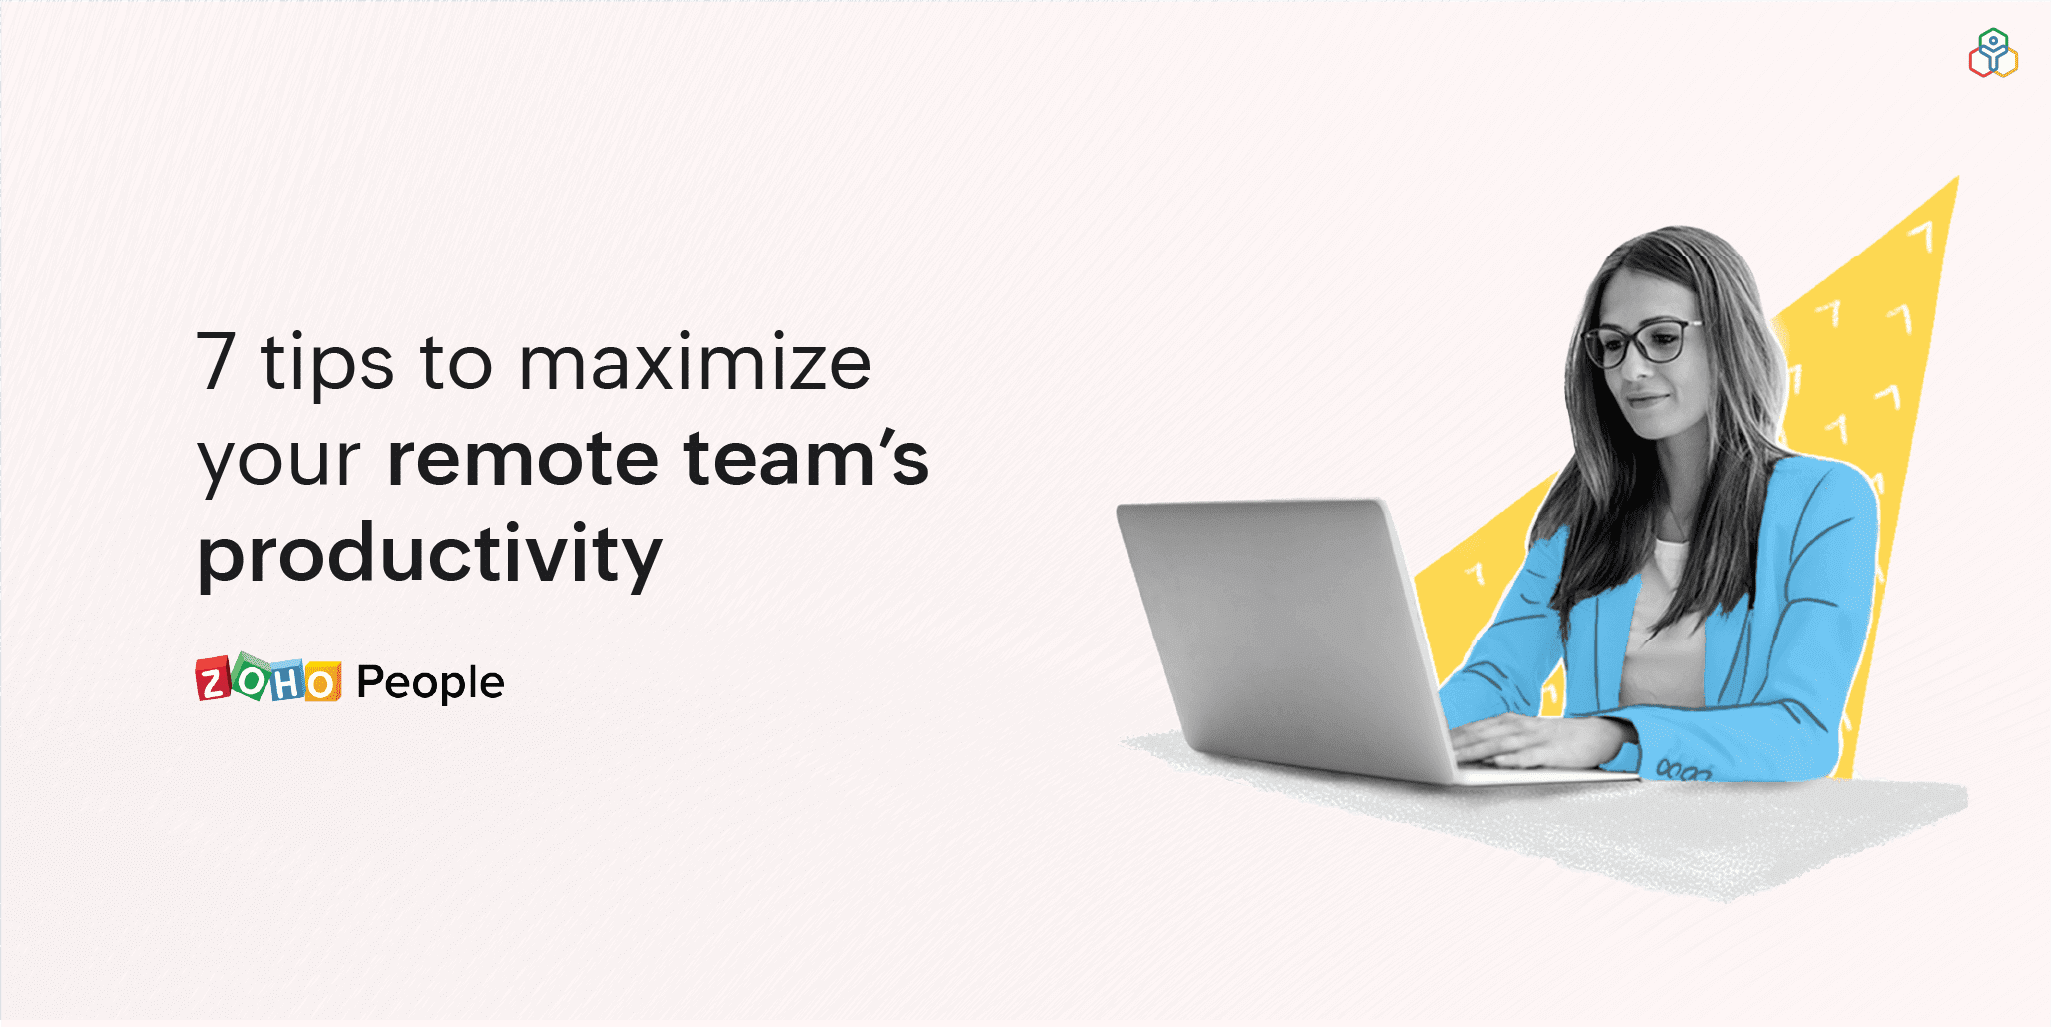 7 ways to increase your remote team’s productivity